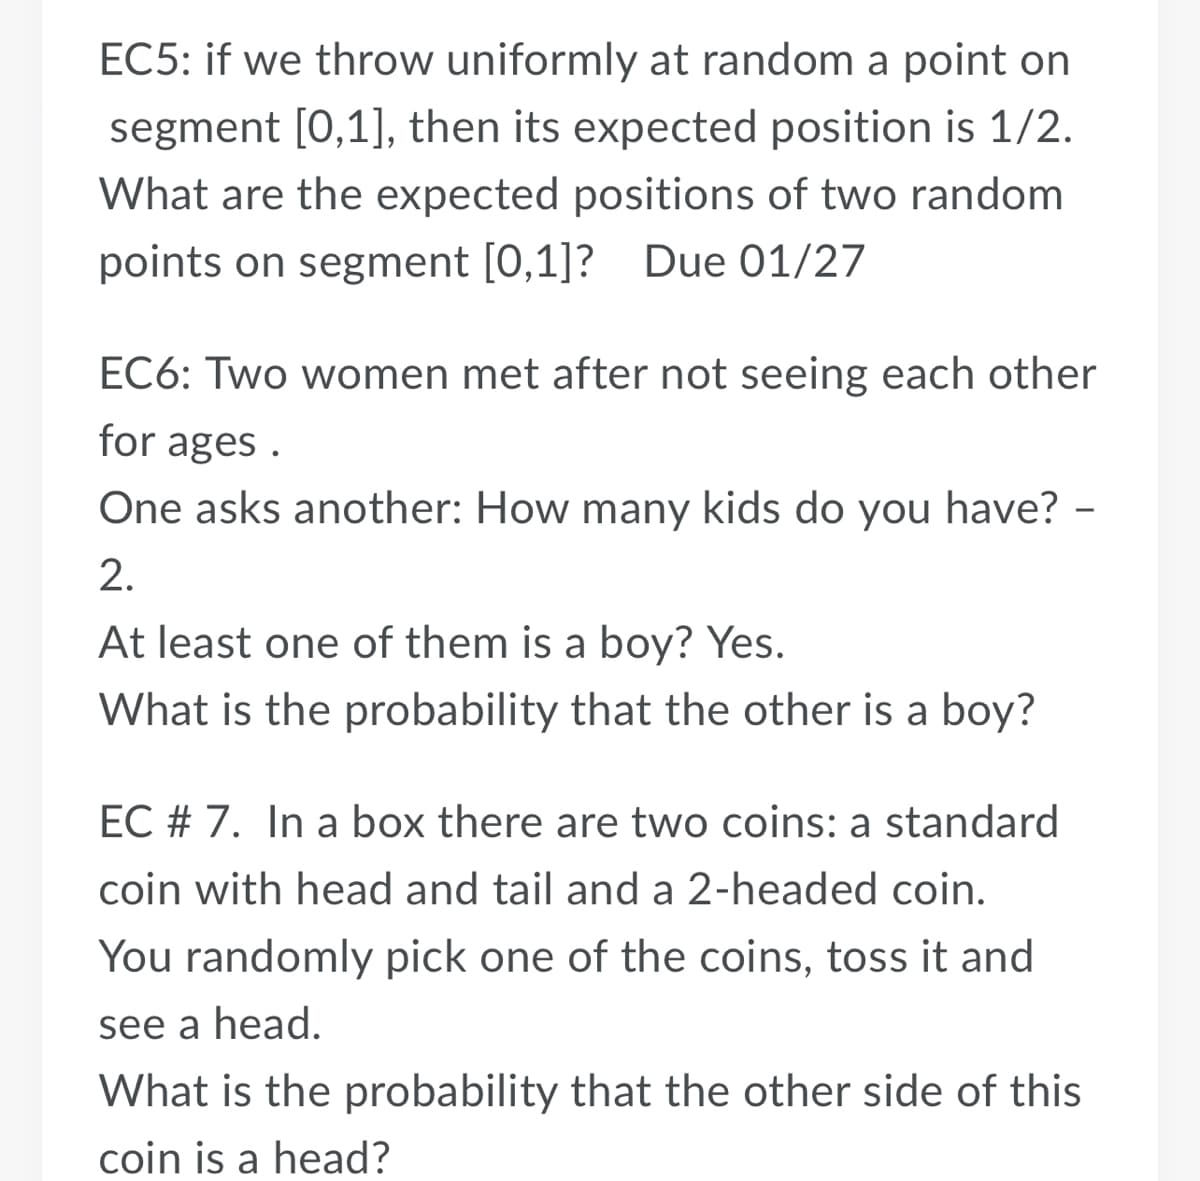 EC5: if we throw uniformly at random a point on
segment [0,1], then its expected position is 1/2.
What are the expected positions of two random
points on segment [0,1]? Due 01/27
EC6: Two women met after not seeing each other
for ages .
One asks another: How many kids do you have? -
2.
At least one of them is a boy? Yes.
What is the probability that the other is a boy?
EC # 7. In a box there are two coins: a standard
coin with head and tail and a 2-headed coin.
You randomly pick one of the coins, toss it and
see a head.
What is the probability that the other side of this
coin is a head?
